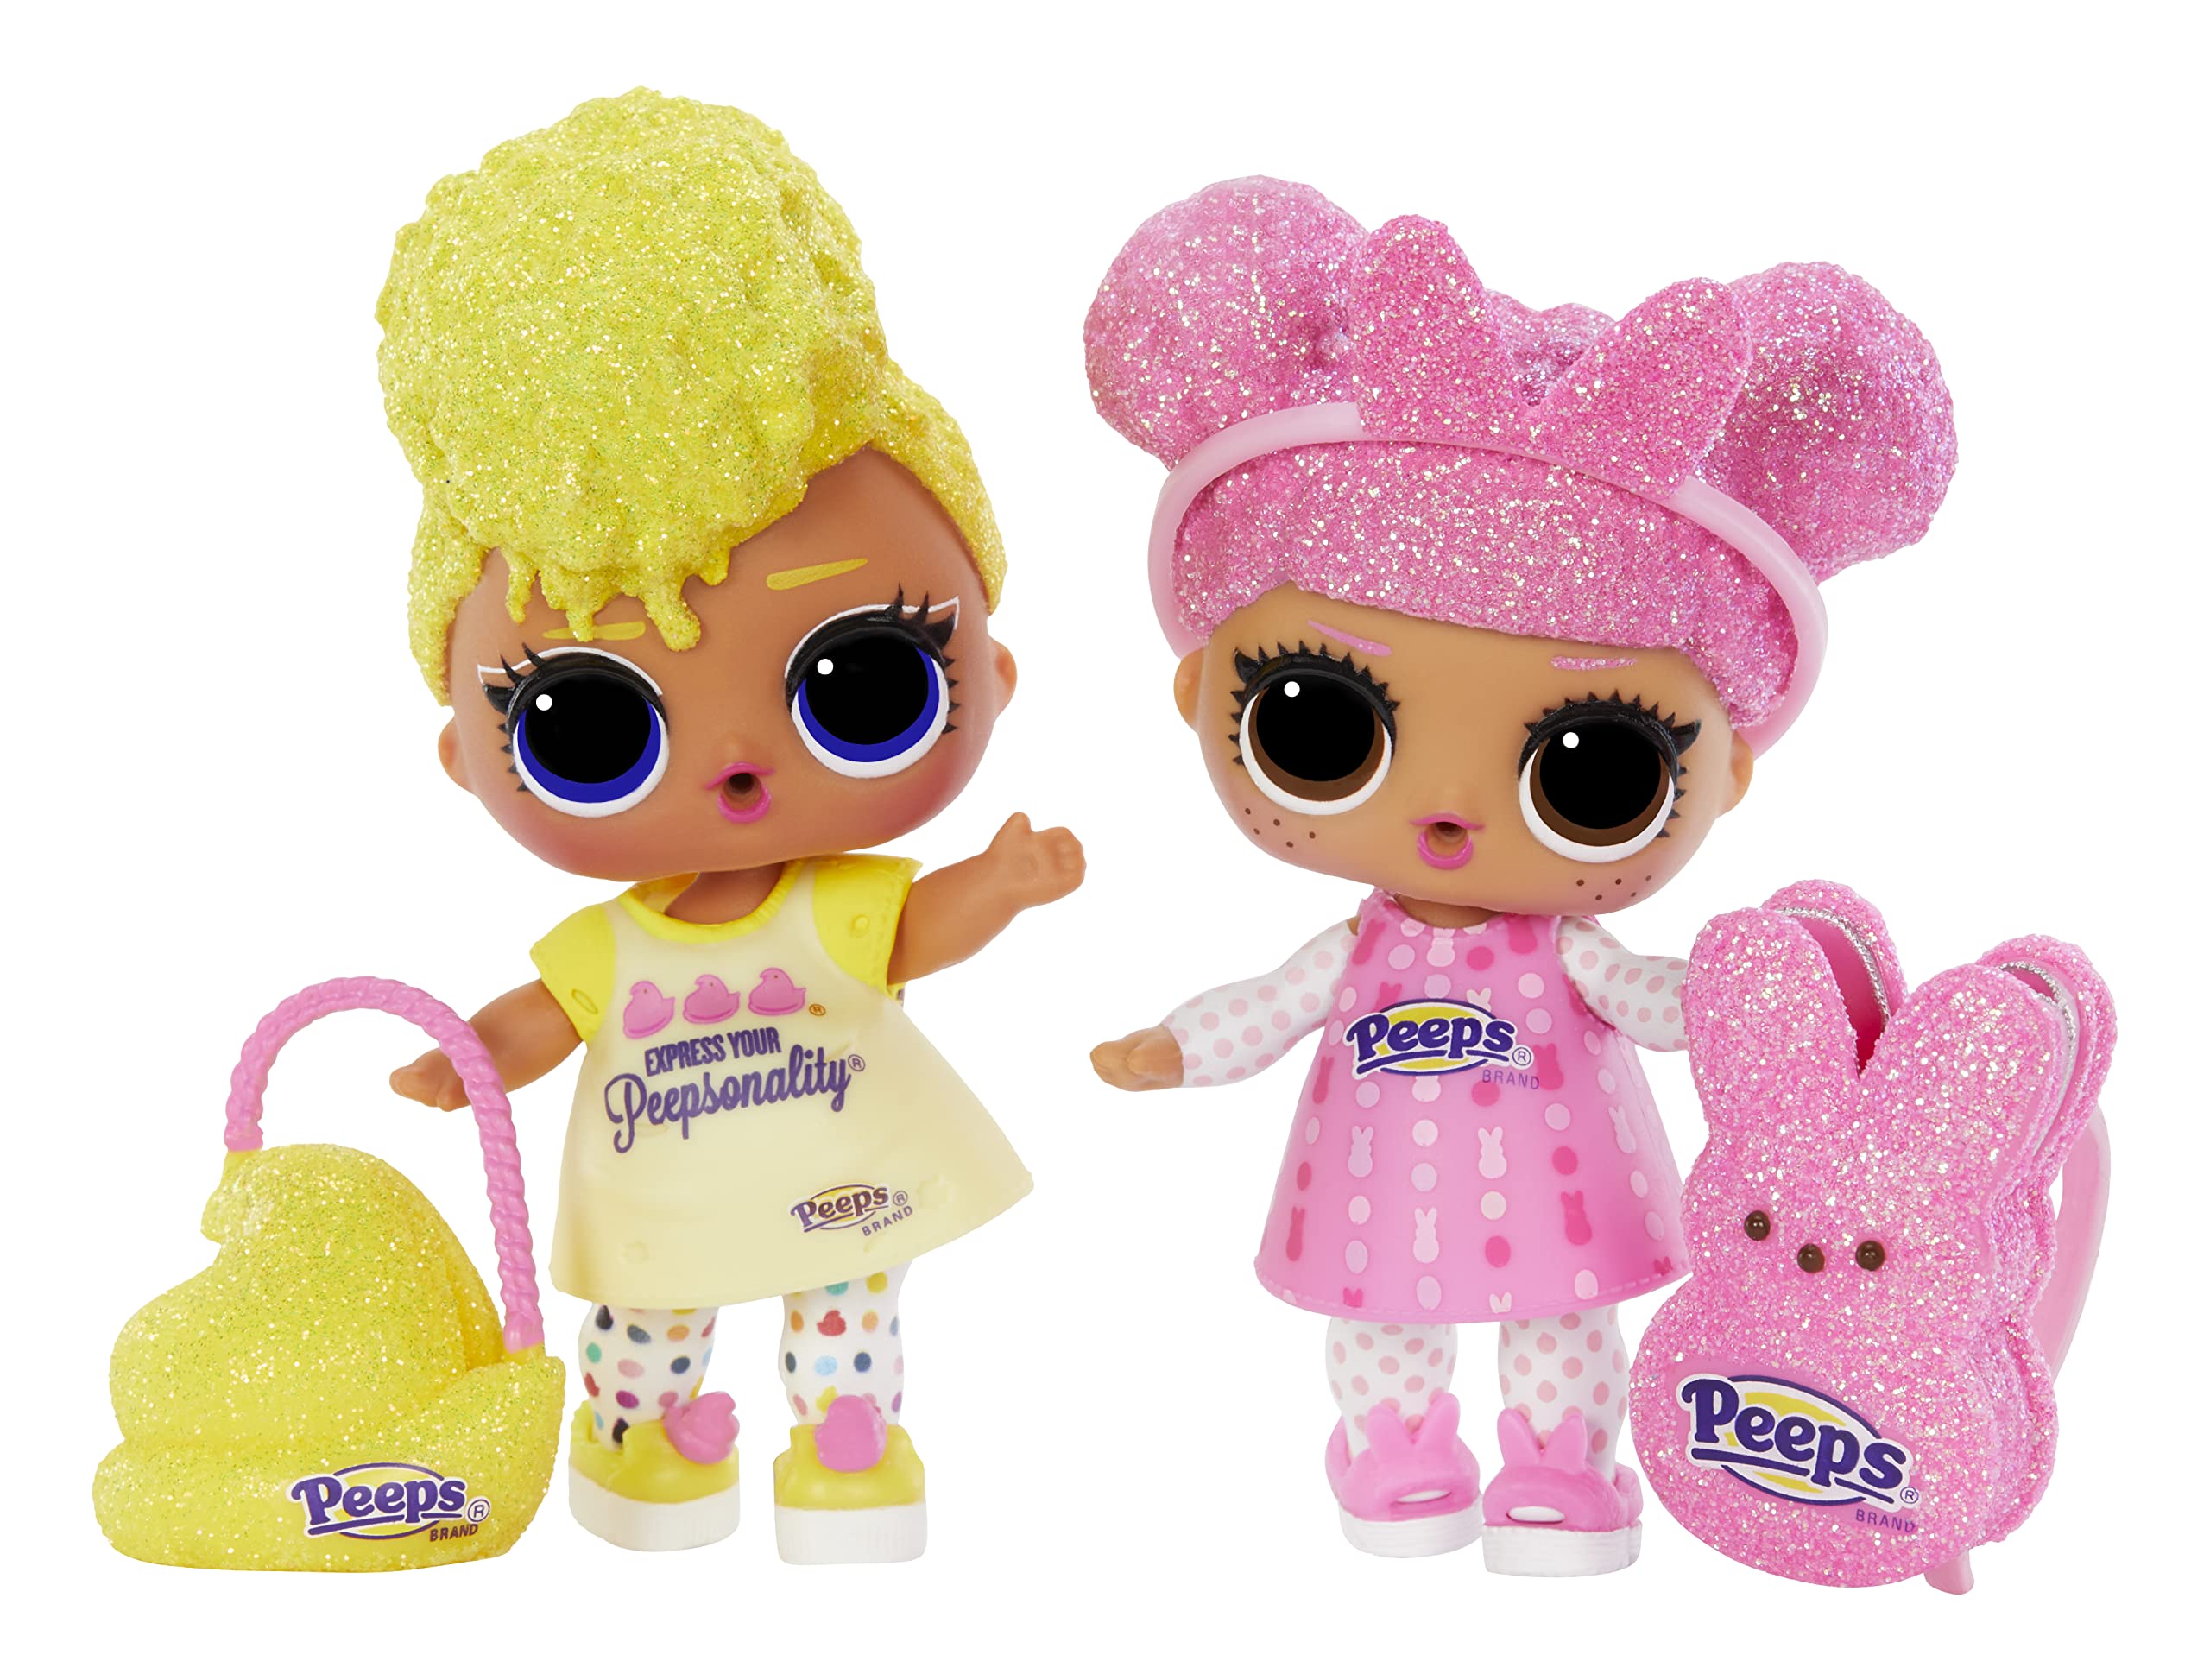 LOL Surprise Loves Mini Sweets Peeps- Tough Chick with Collectible Doll, 7 Surprises, Spring Theme, Peeps Limited Edition Doll- Great Gift for Girls Age 4+